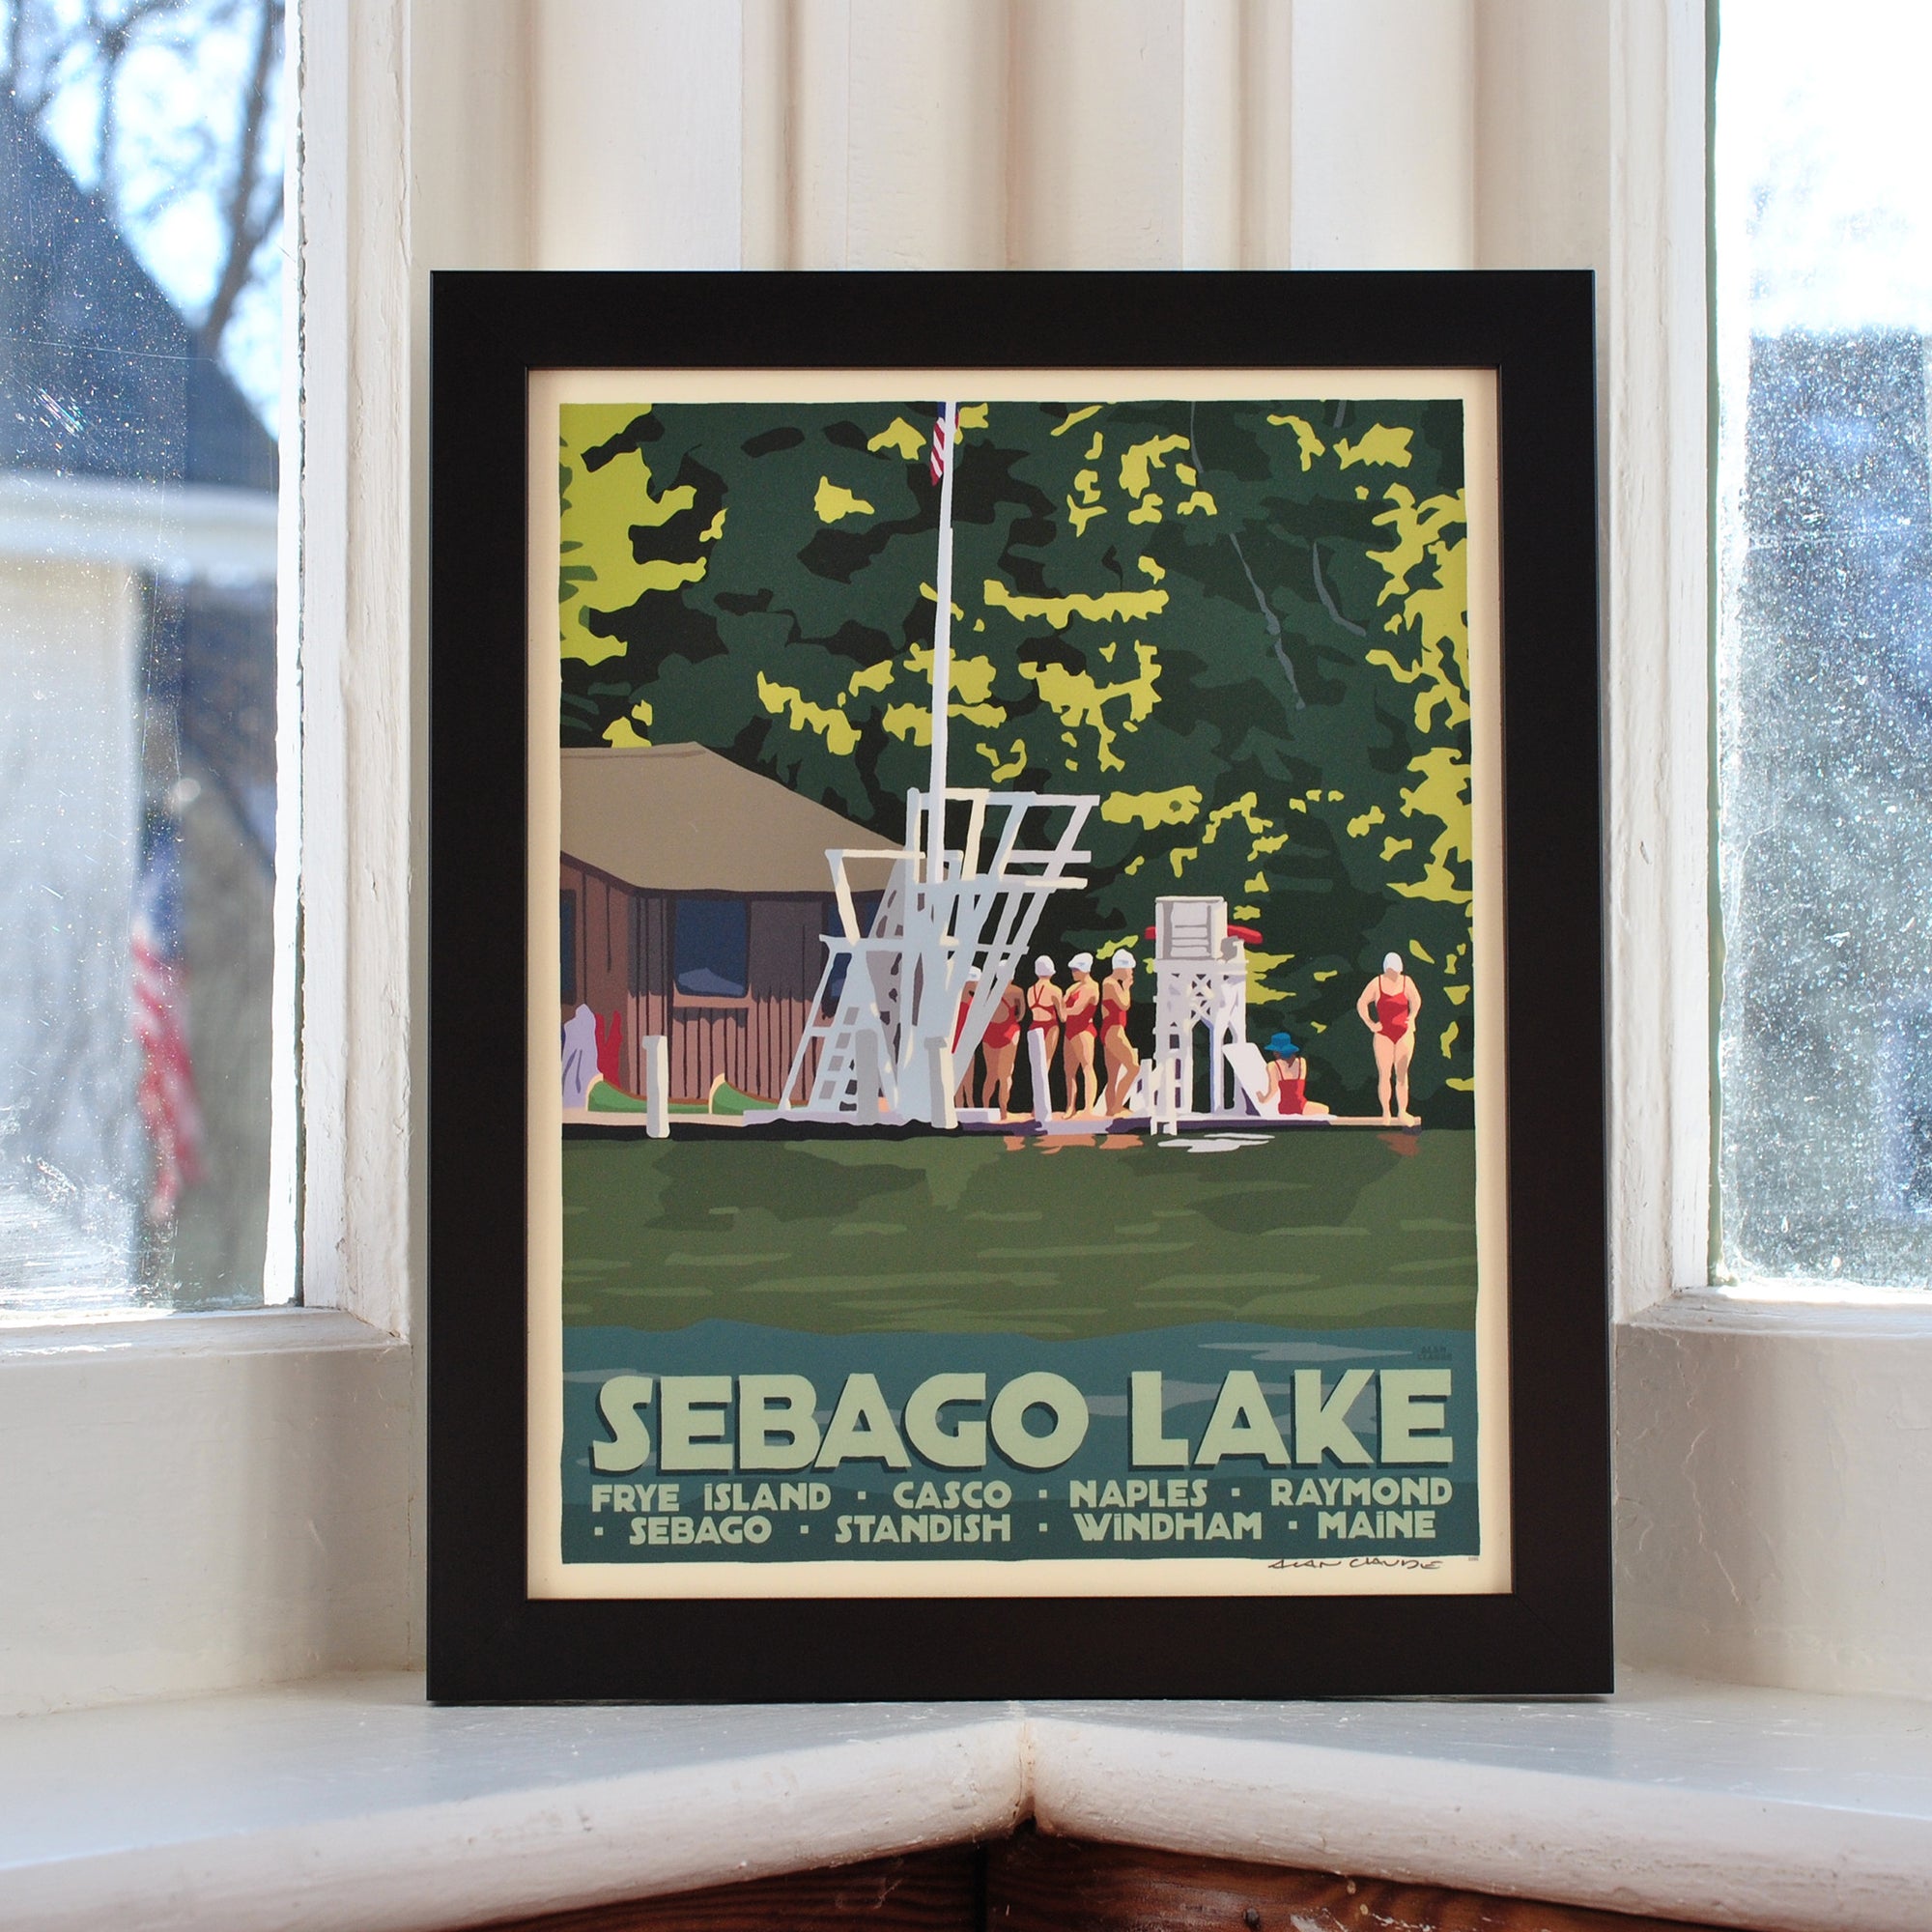 Sebago Lake Swimmers Art Print 8" x 10" Framed Travel Poster By Alan Claude - Maine